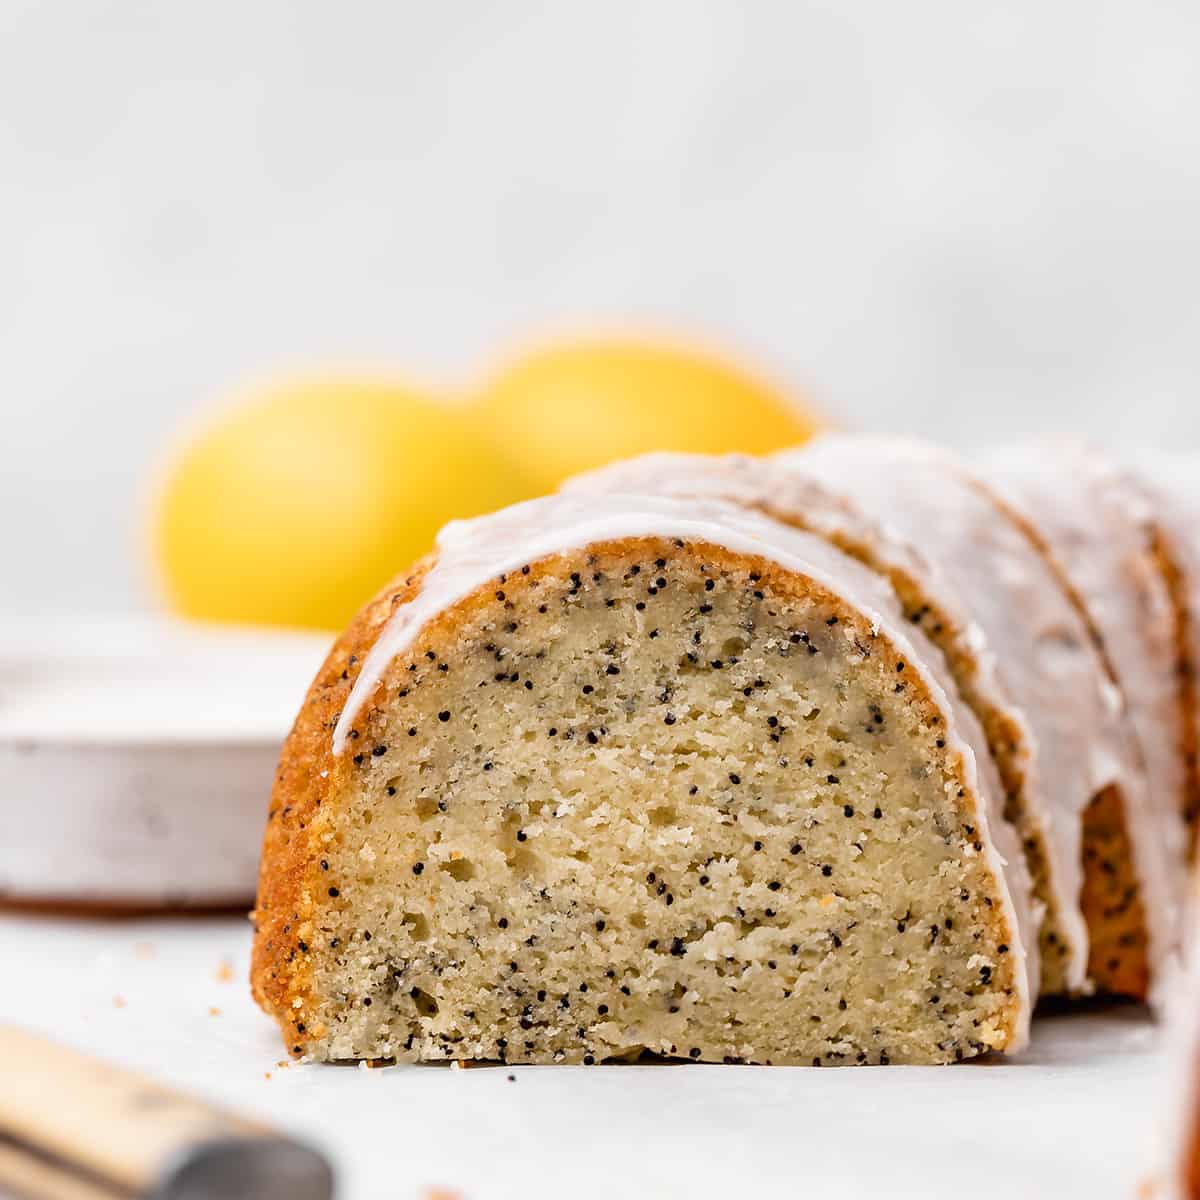 front view of a Lemon Poppy Seed Cake with a piece cut out of it so the texture is visible